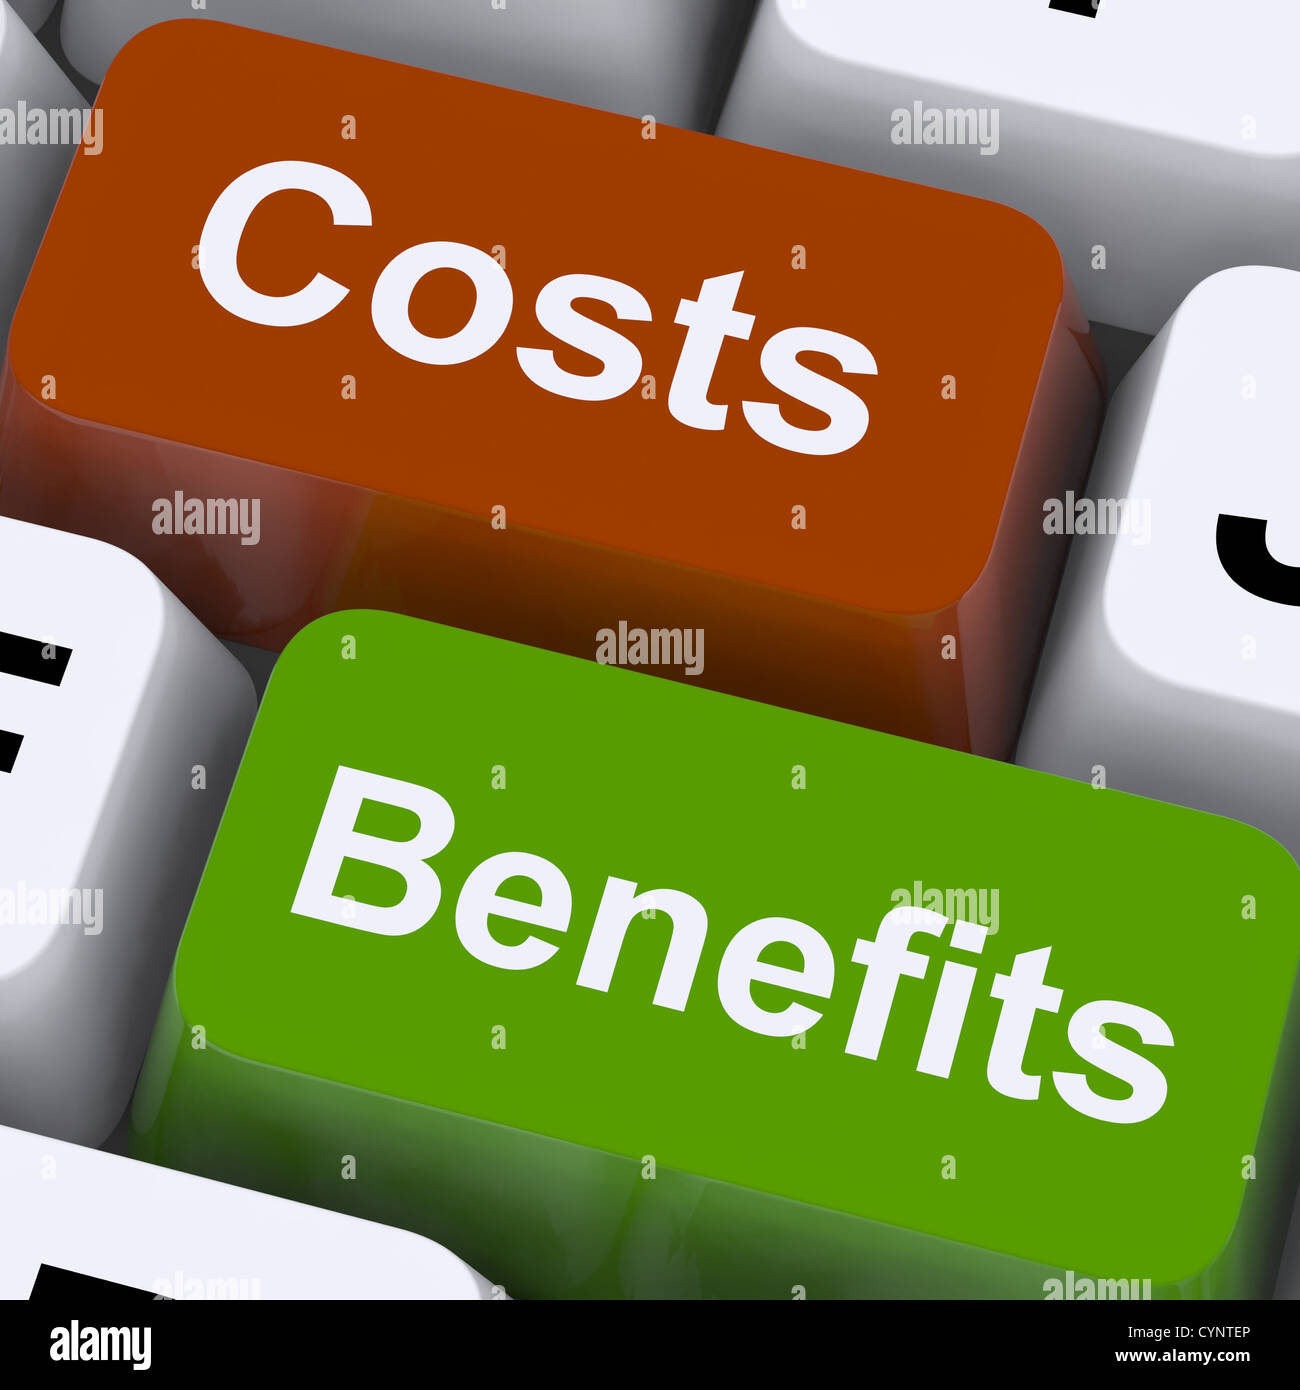 Costs Benefits Keys Show Analysis And Value Of An Investment Stock Photo